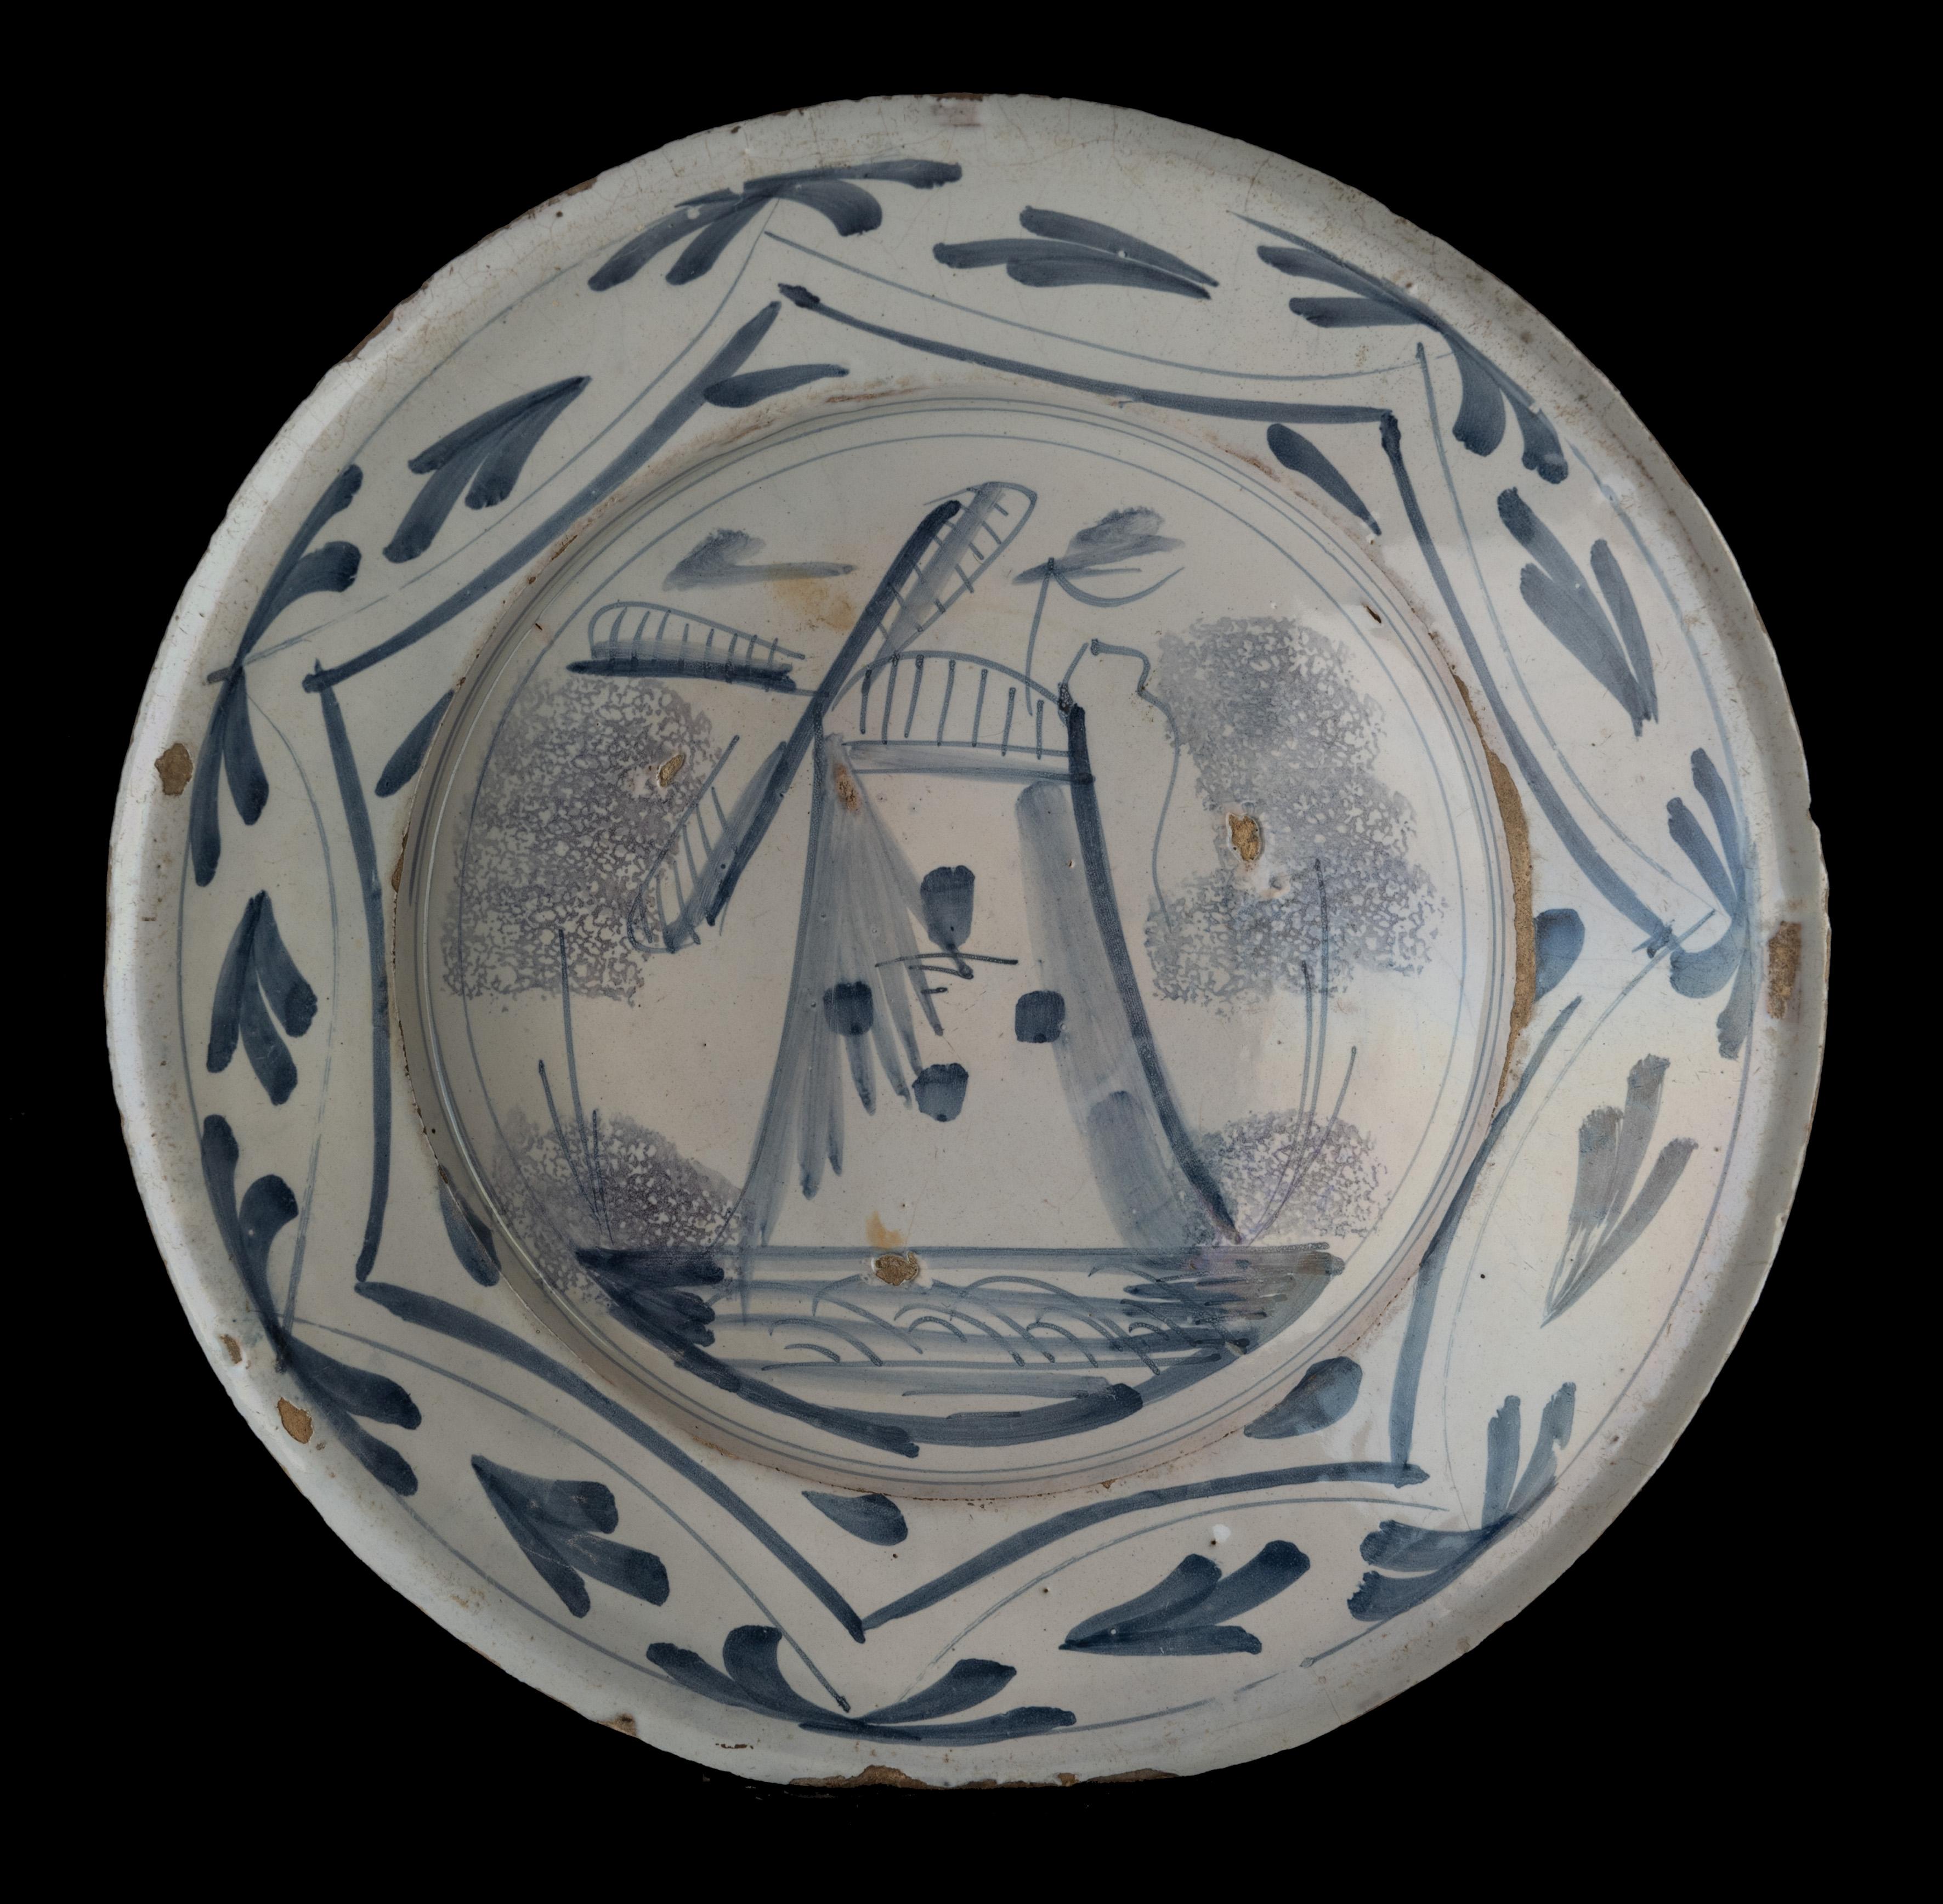 Blue and white dish with windmill.
Delft, 1700-1750 

The dish has a raised flange and is painted in blue with a windmill between two sponged trees. The depiction is framed within three circles. The border decor is made up of a heptagon with